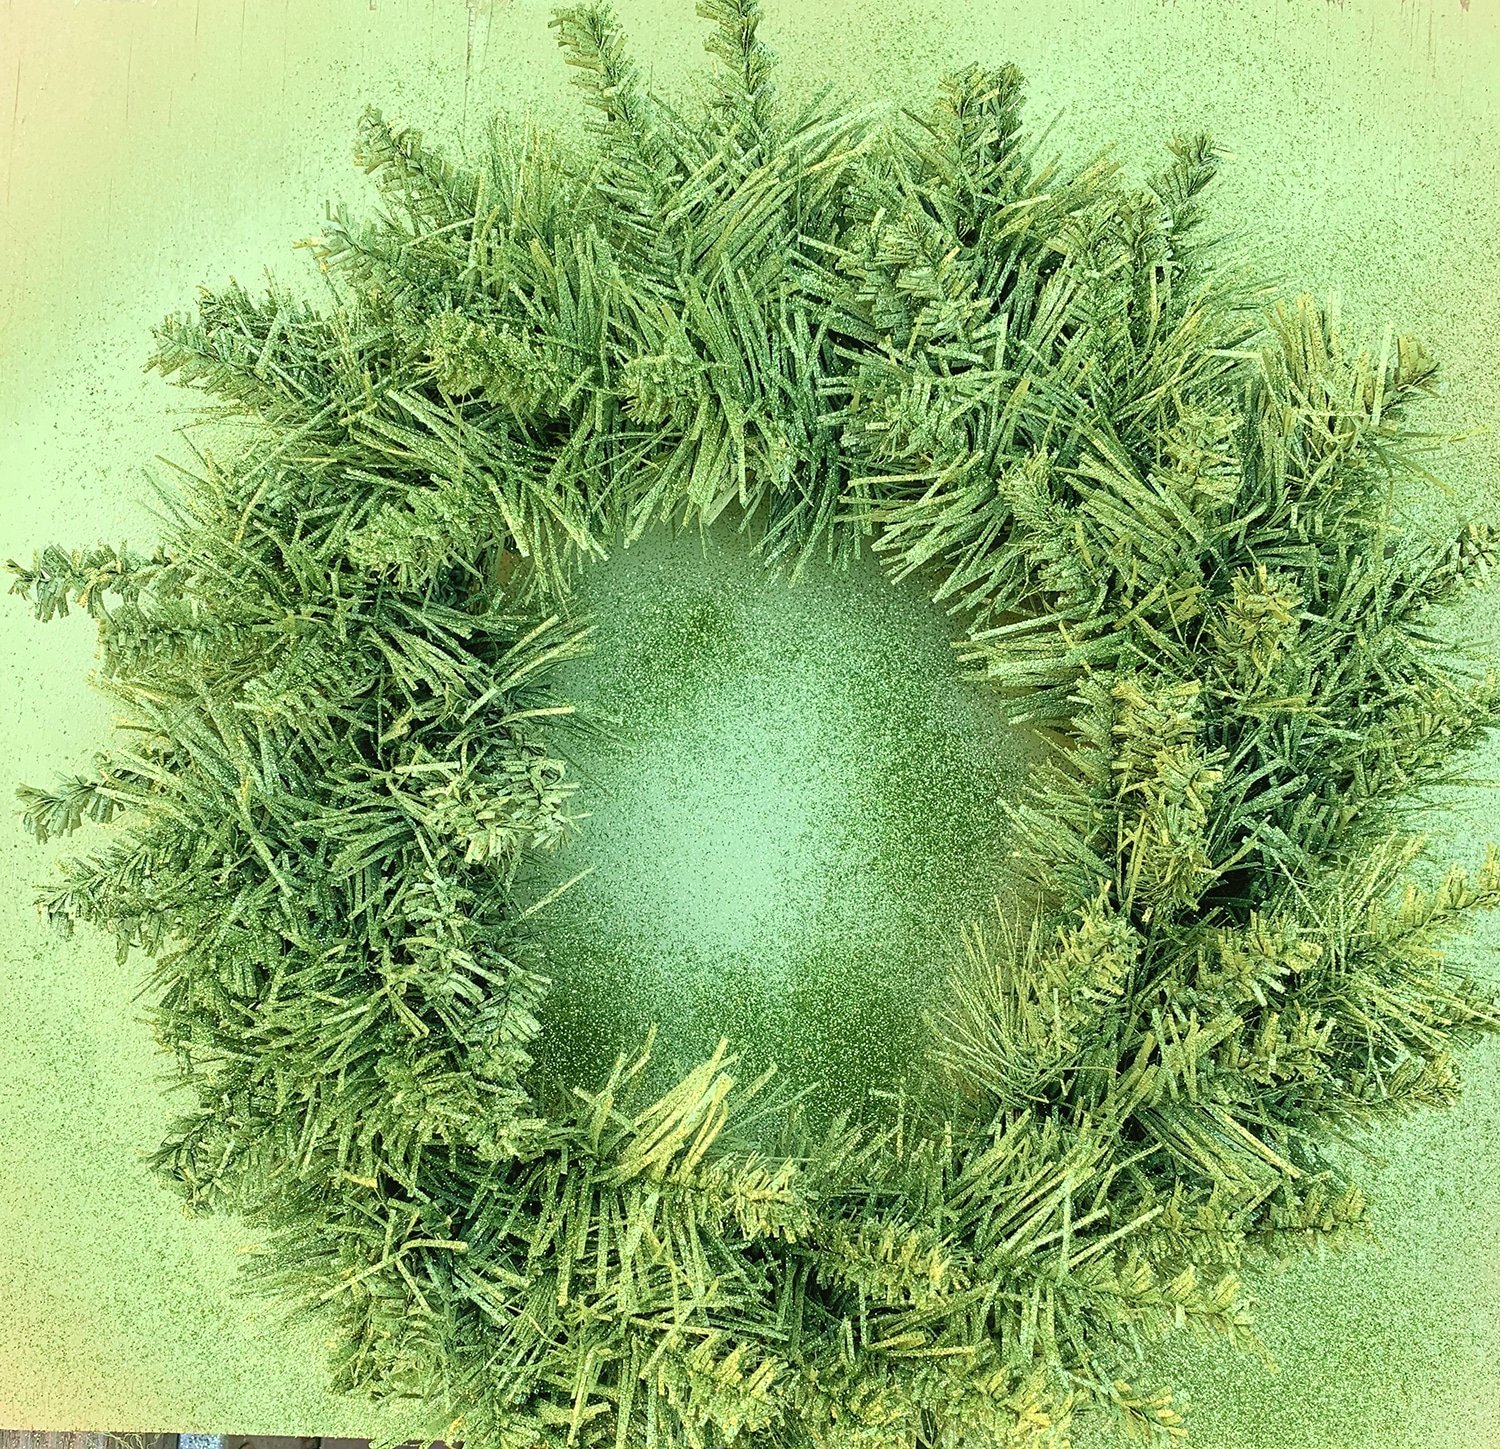 green faux wreath sprayed with glitter